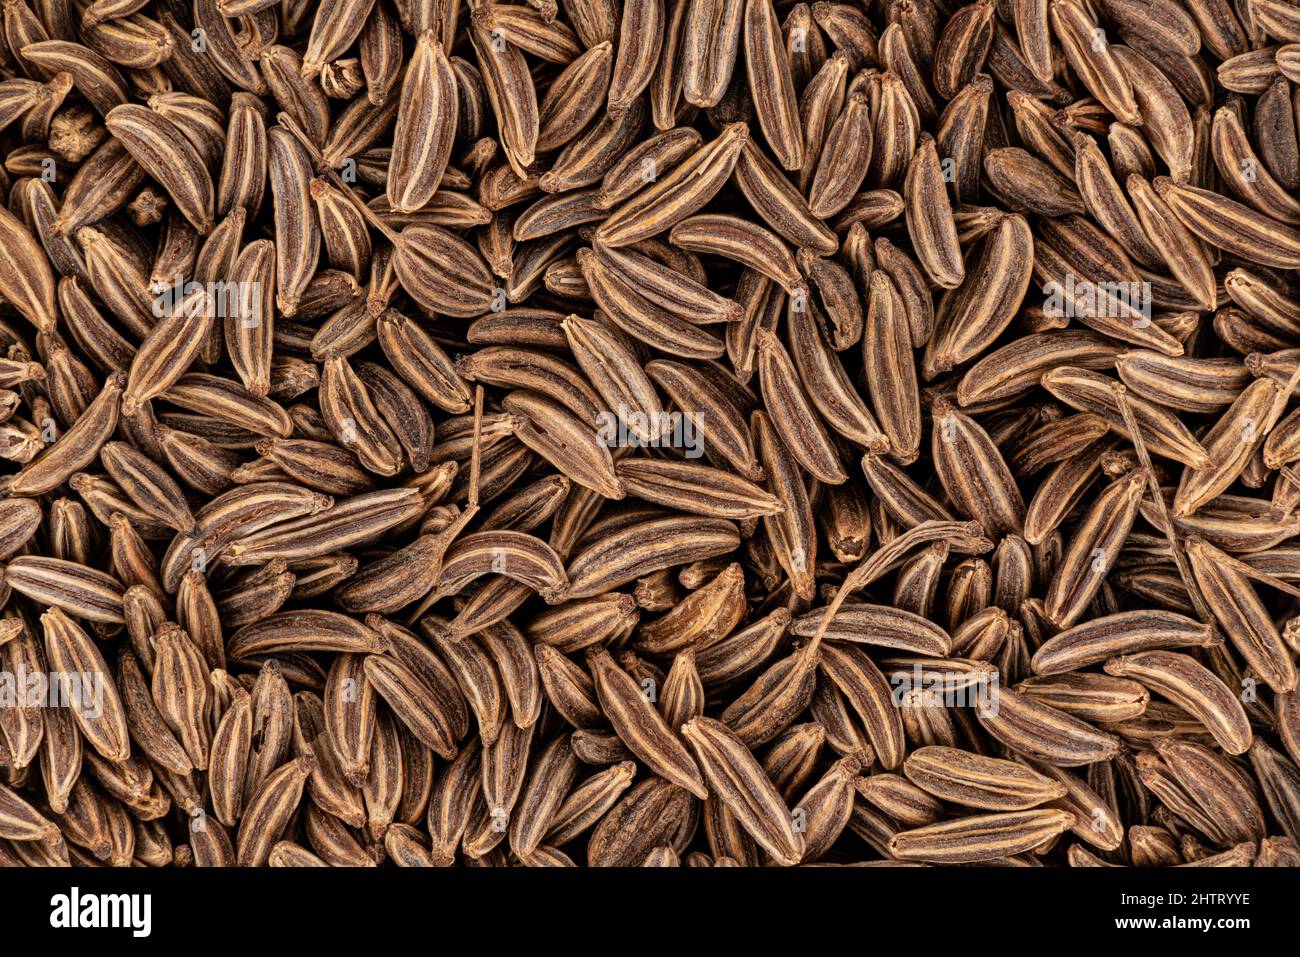 Closeup detail of caraway seeds - meridian fennel - Carum carvi shot from above, image width 23mm Stock Photo